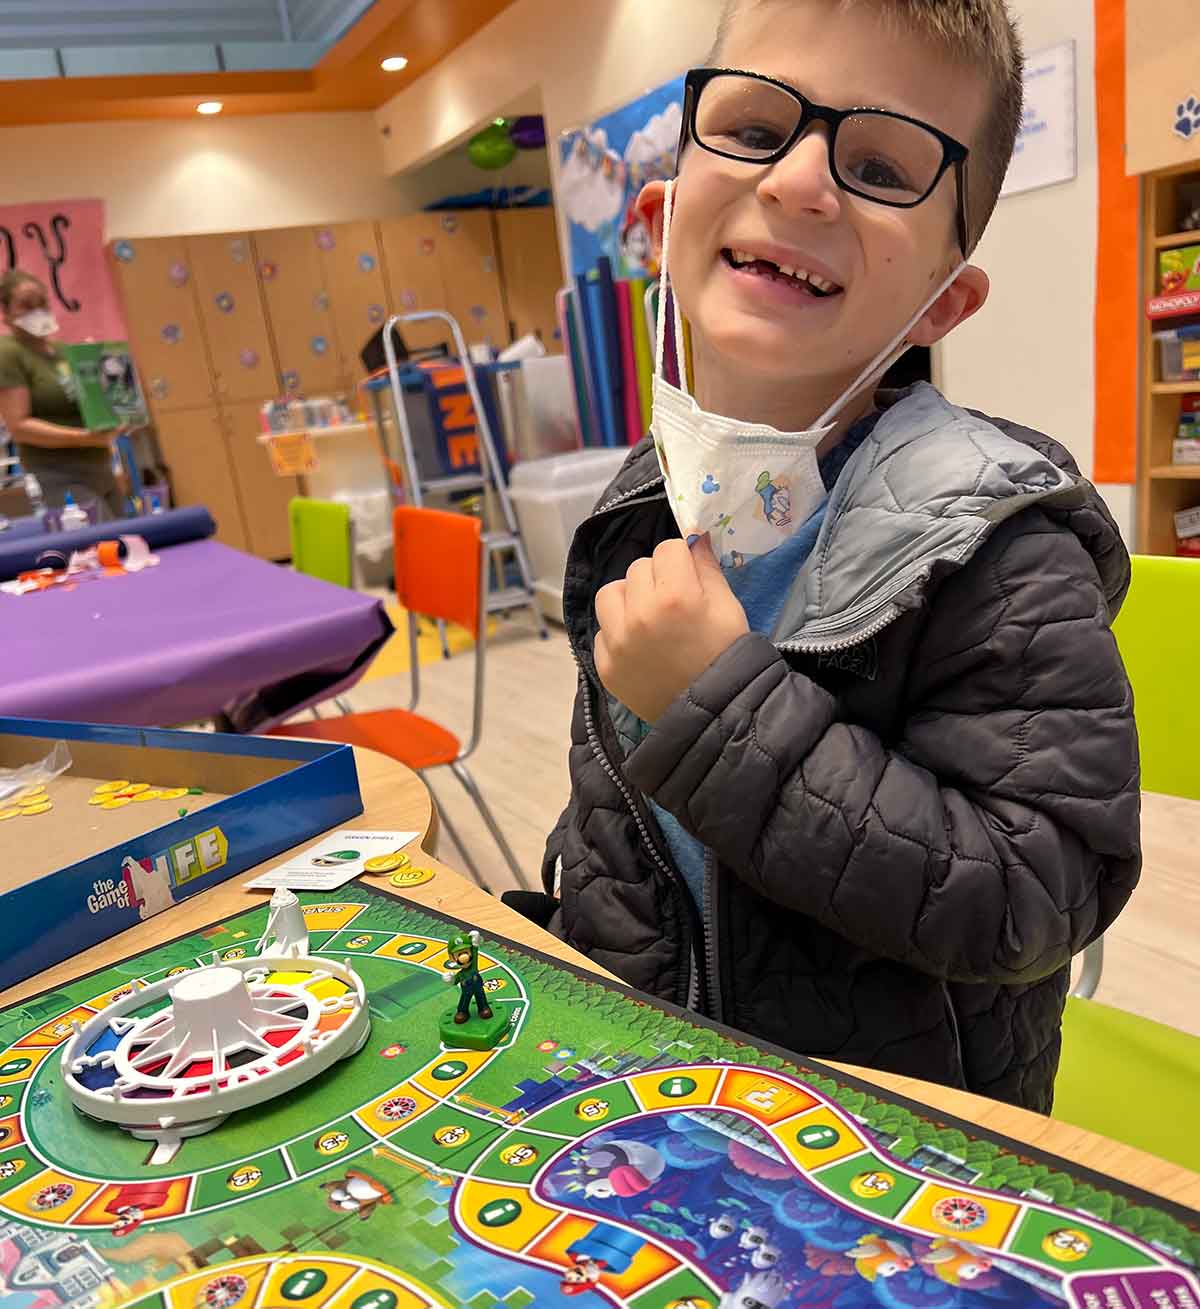 Little boy smiling at camera, standing over a board game.